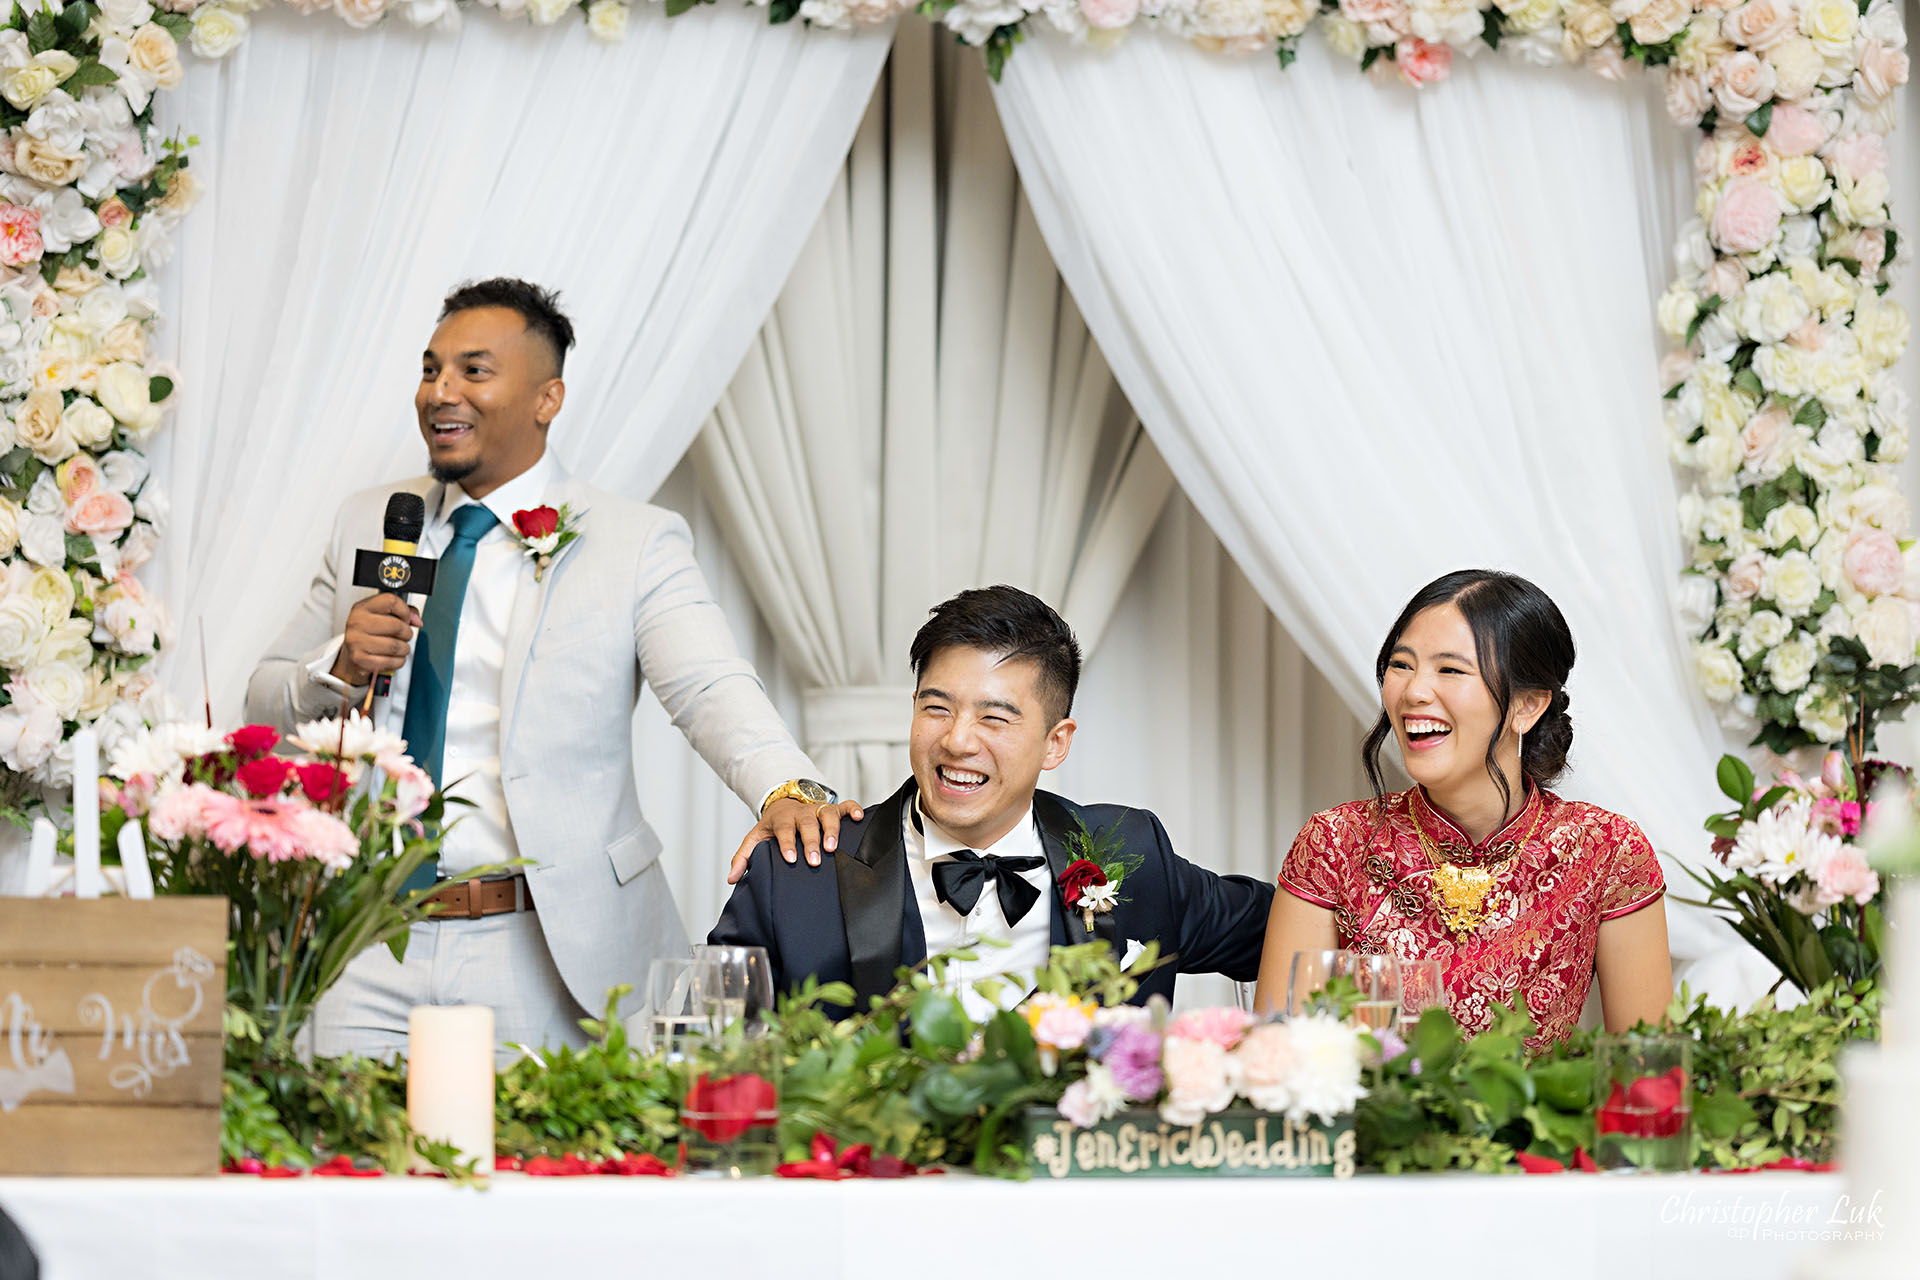 Crystal Fountain Event Venue Markham Wedding Dinner Reception Bride Groom Candid Natural Organic Photojournalistic Speeches Reaction Laughing Happy Smiling